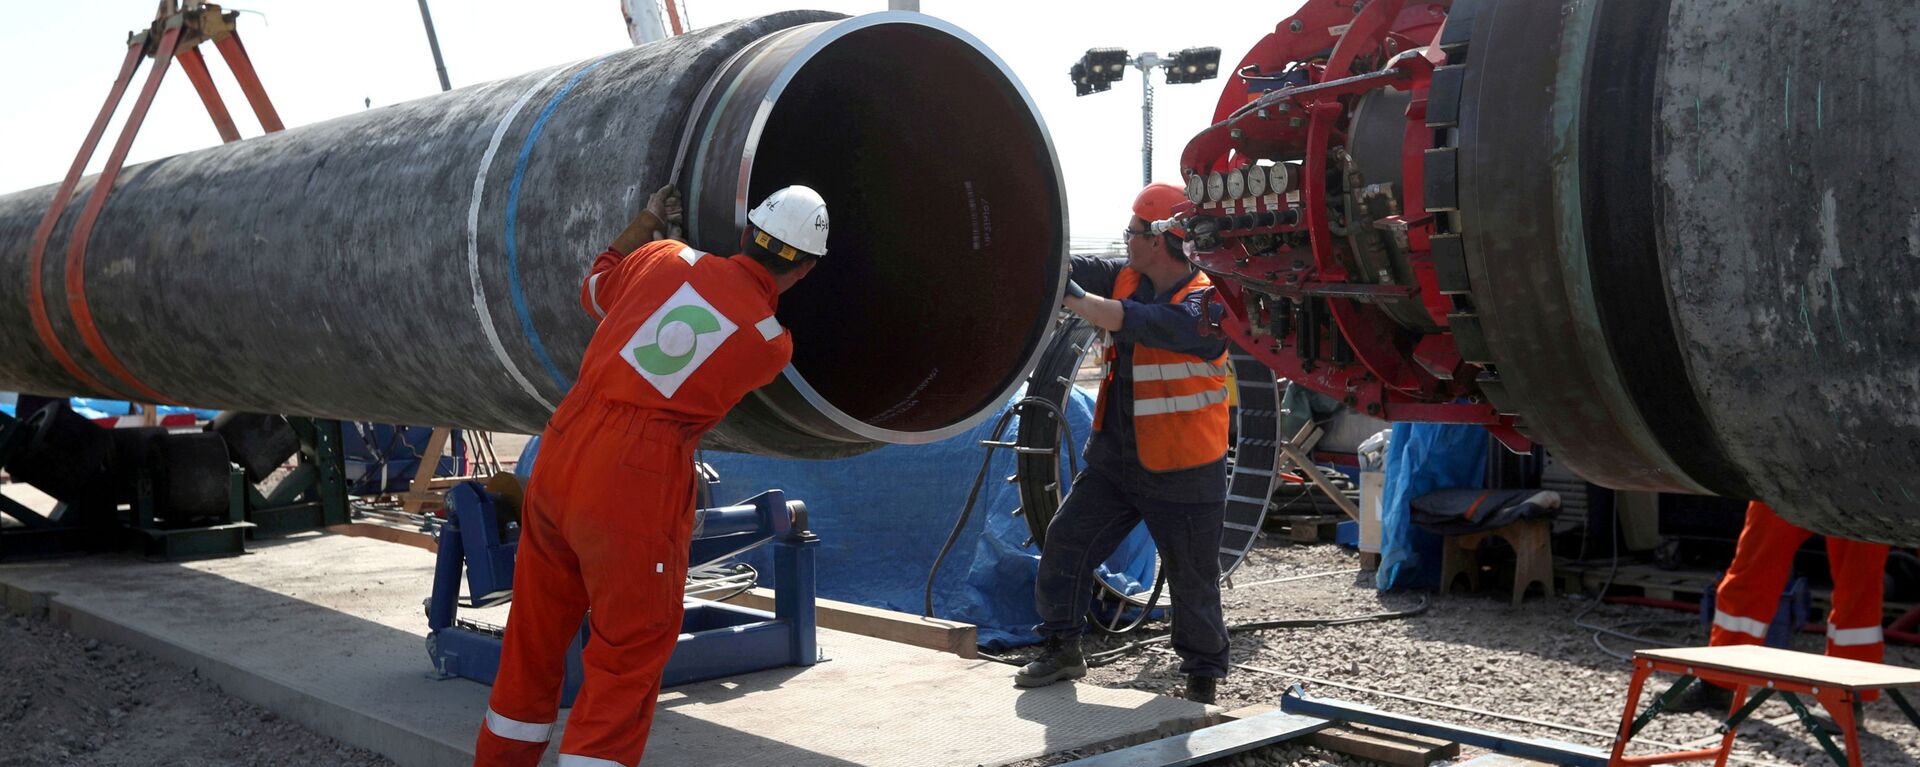 FILE PHOTO: Workers are seen at the construction site of the Nord Stream 2 gas pipeline, near the town of Kingisepp, Leningrad region, Russia, June 5, 2019 - Sputnik International, 1920, 06.10.2021